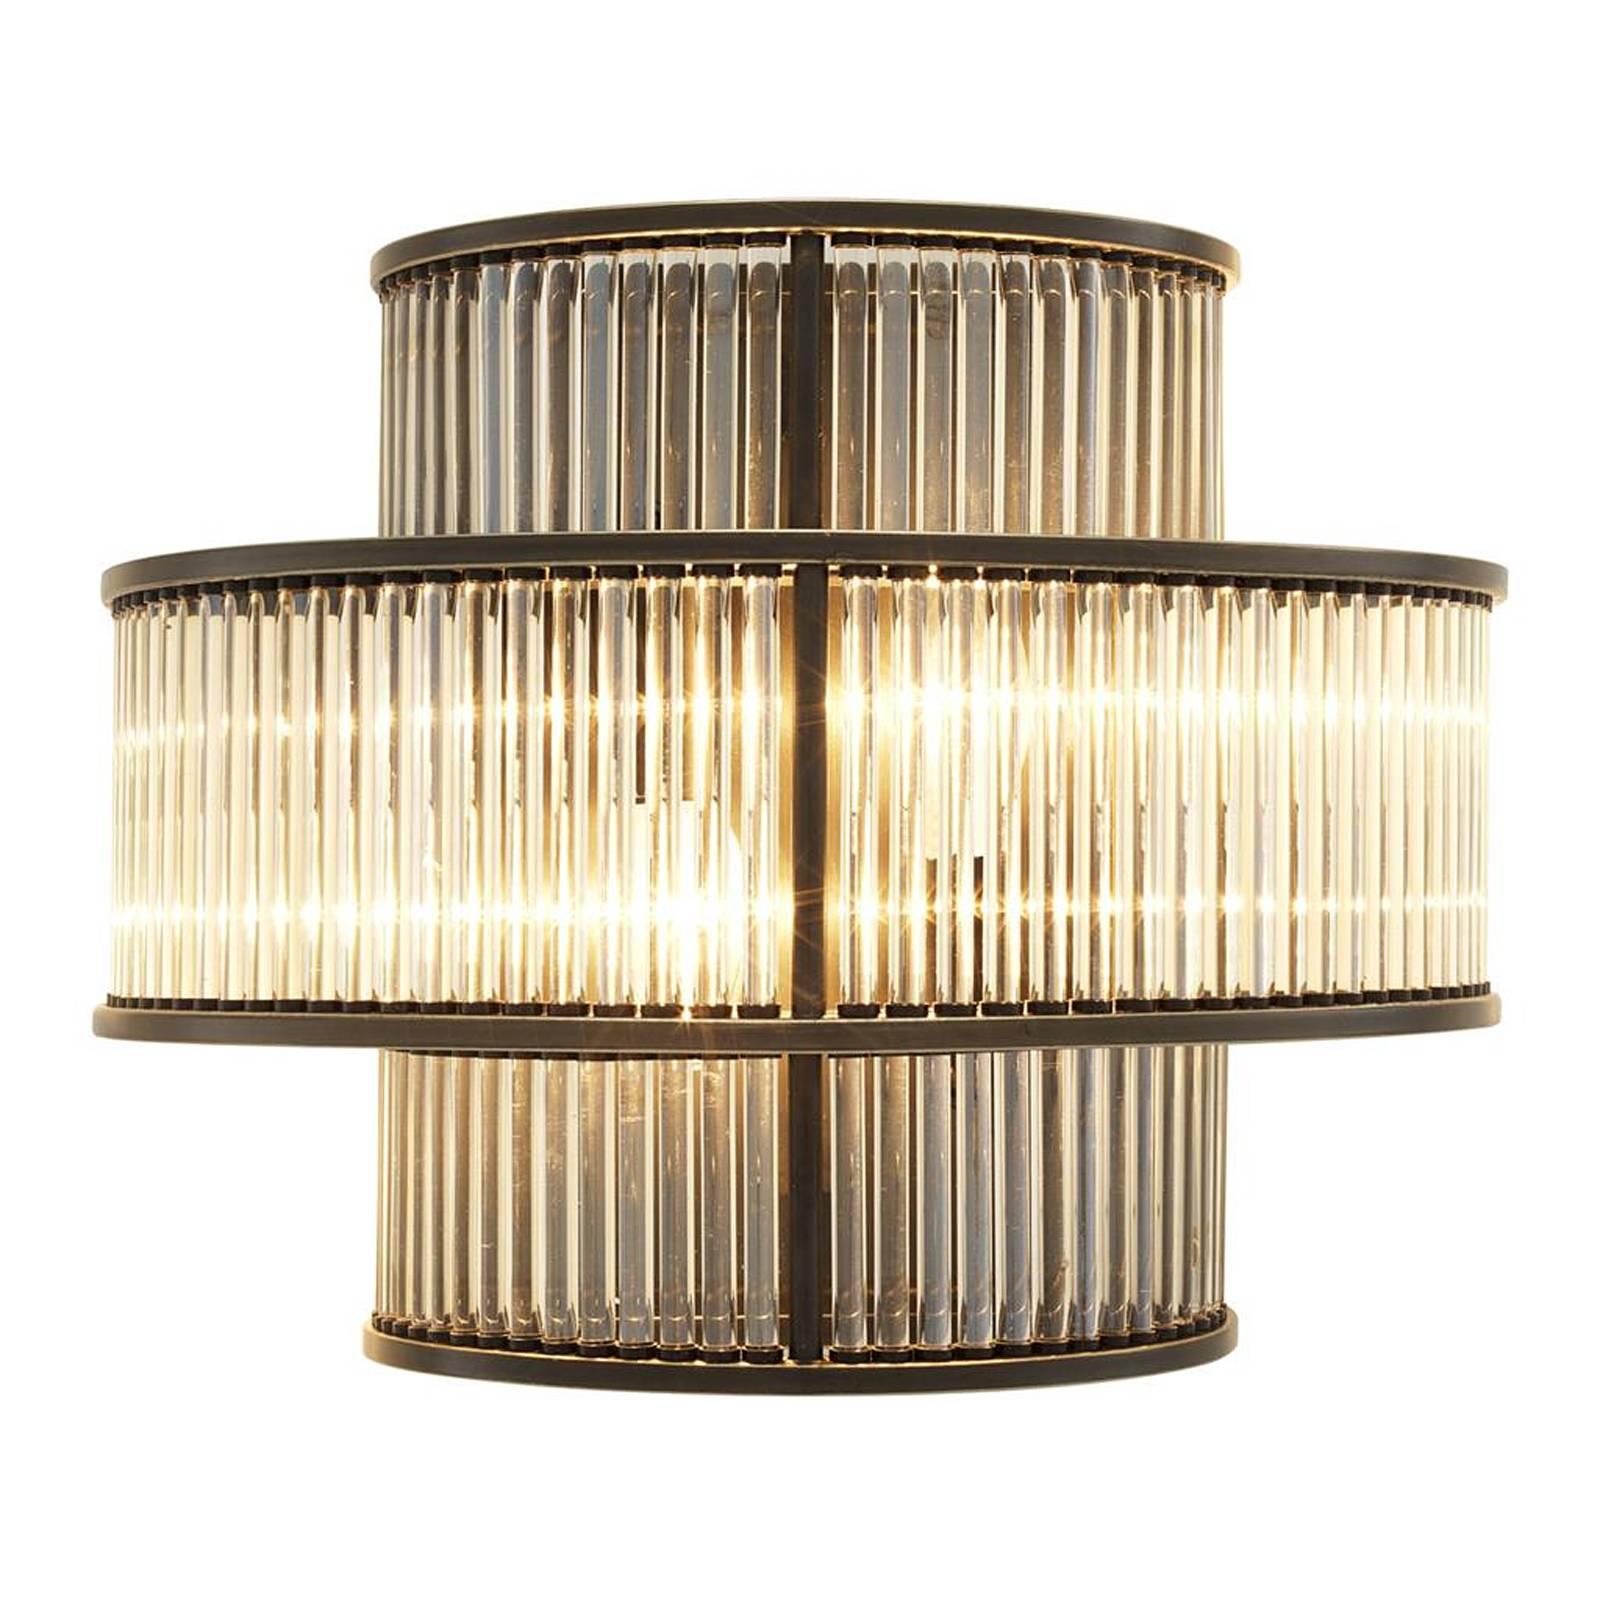 Wall lamp glass stairs with structure in bronze highlight
finish with clear glass. Two bulbs lamp holder type E14, max
40 watt. Bulbs not included.
Also available in nickel finish with clear glass.
